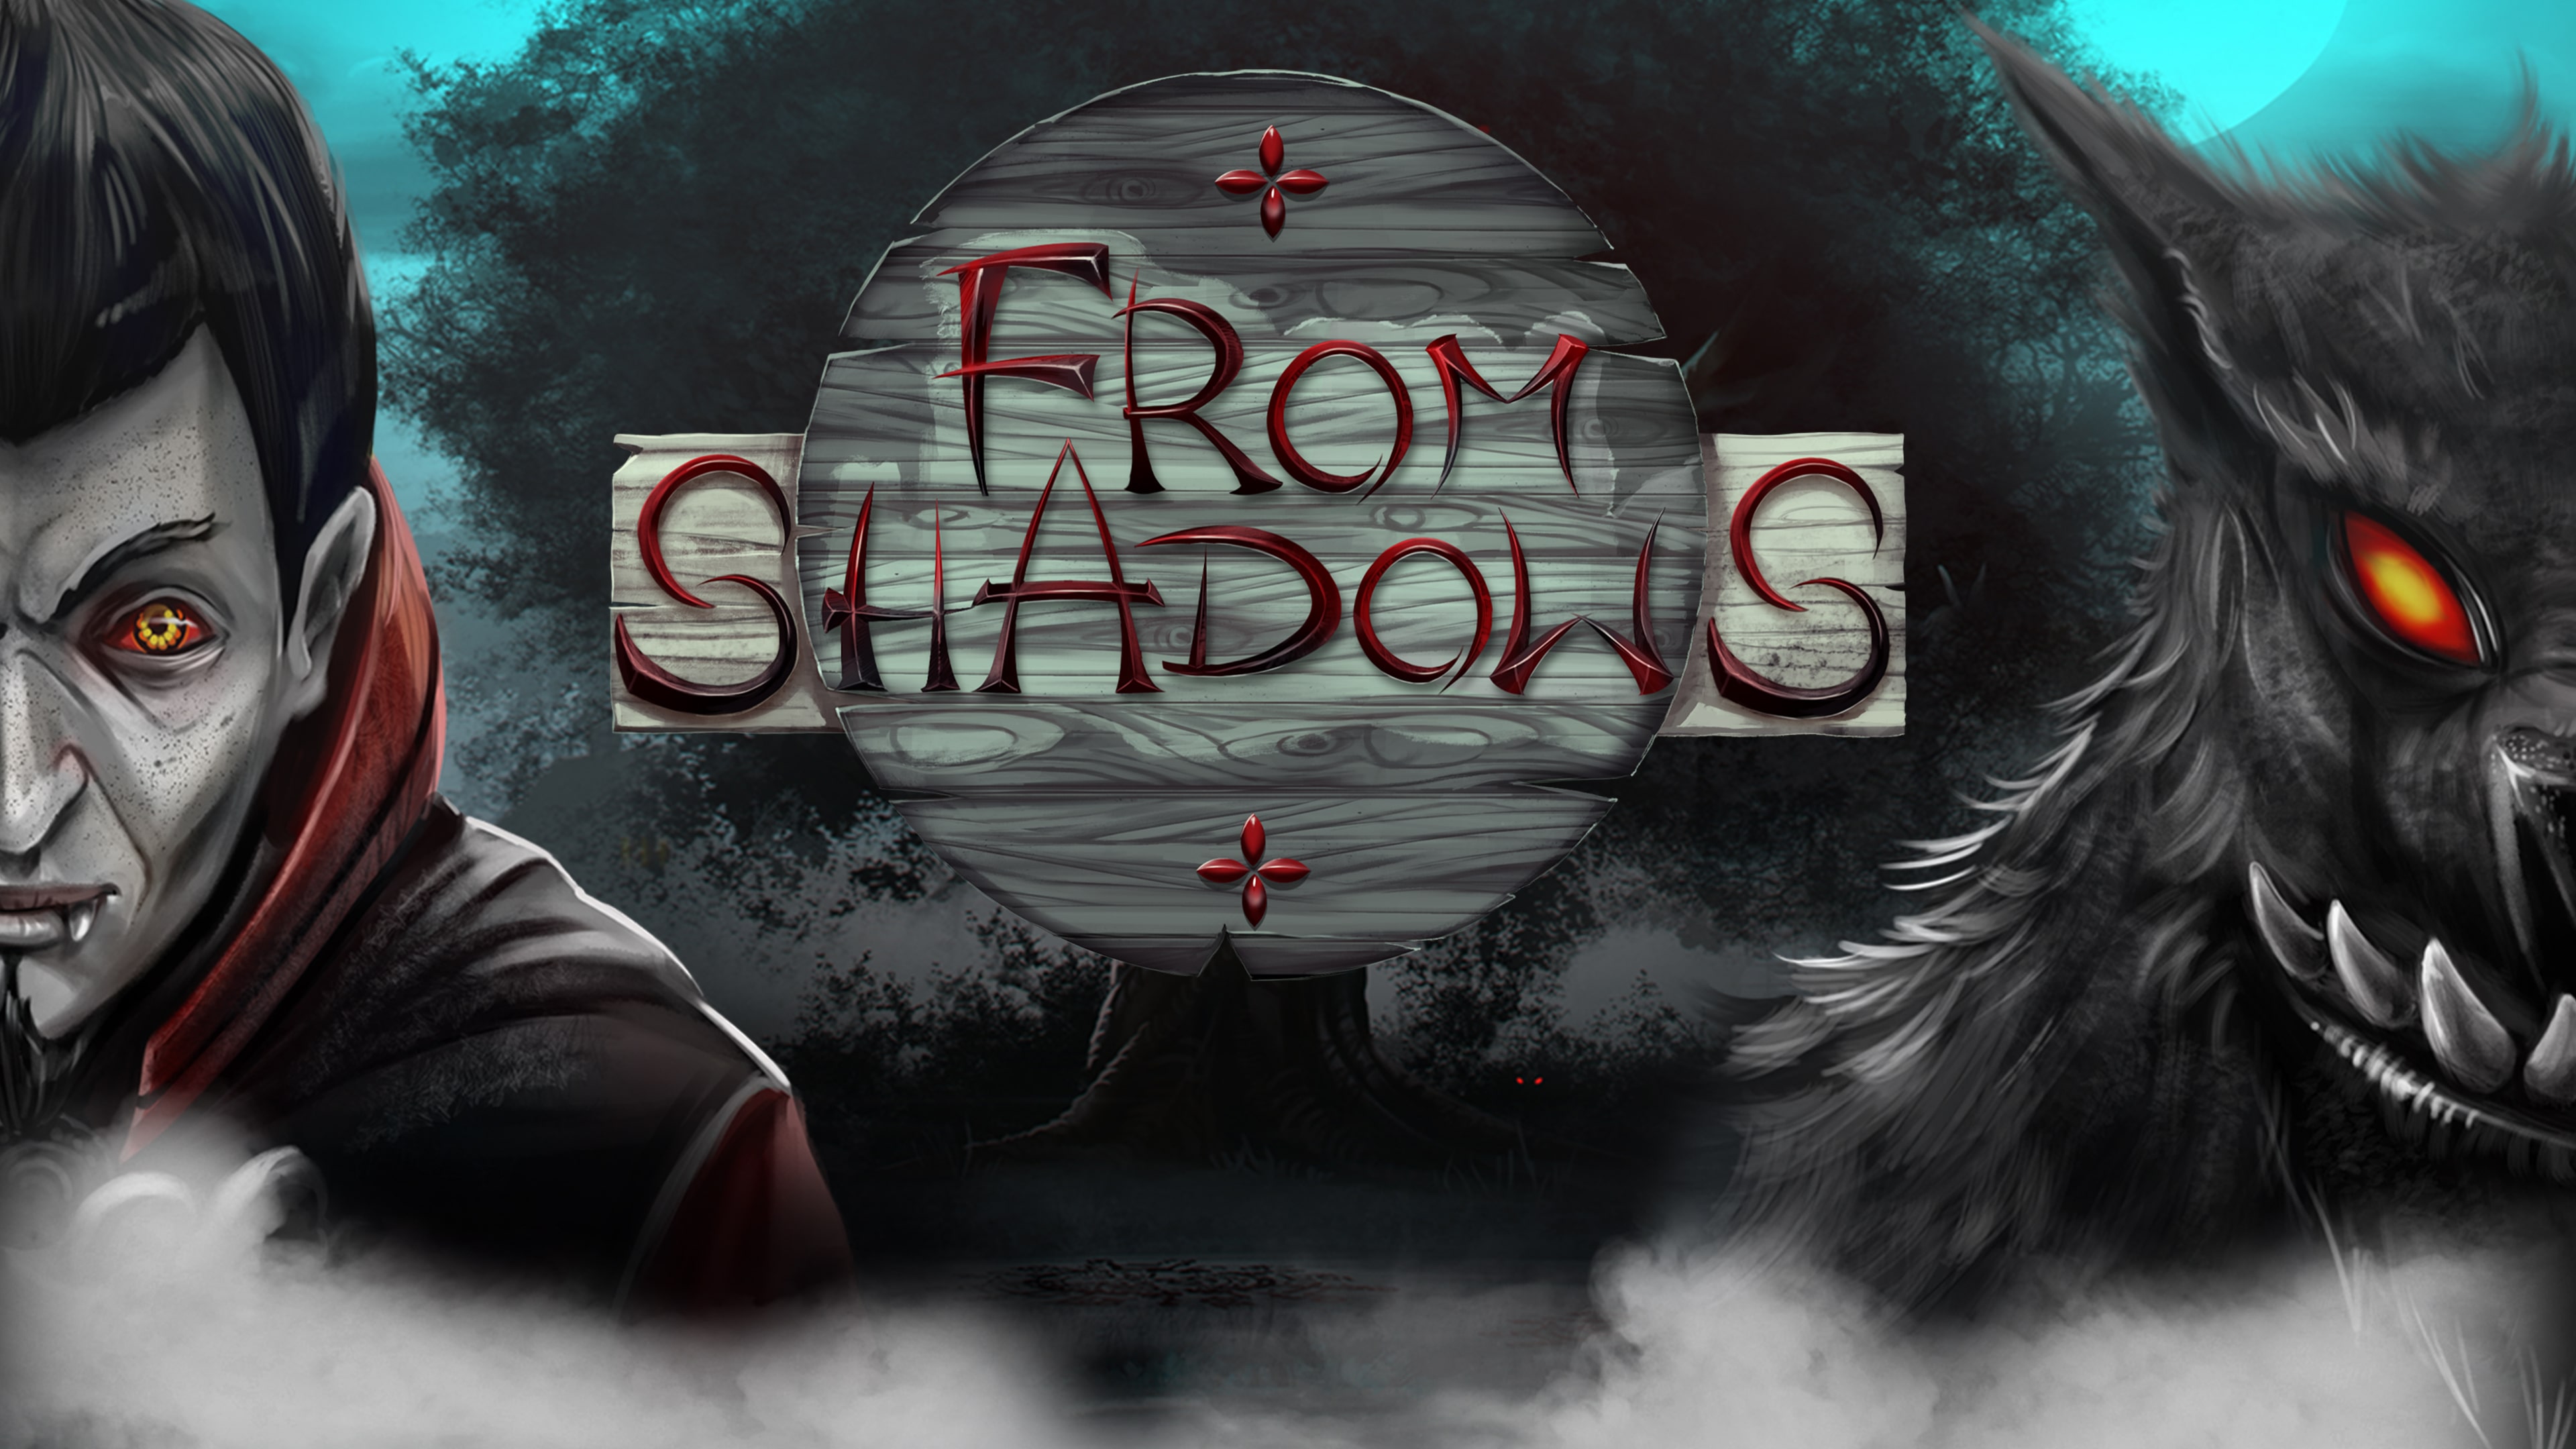 From Shadows